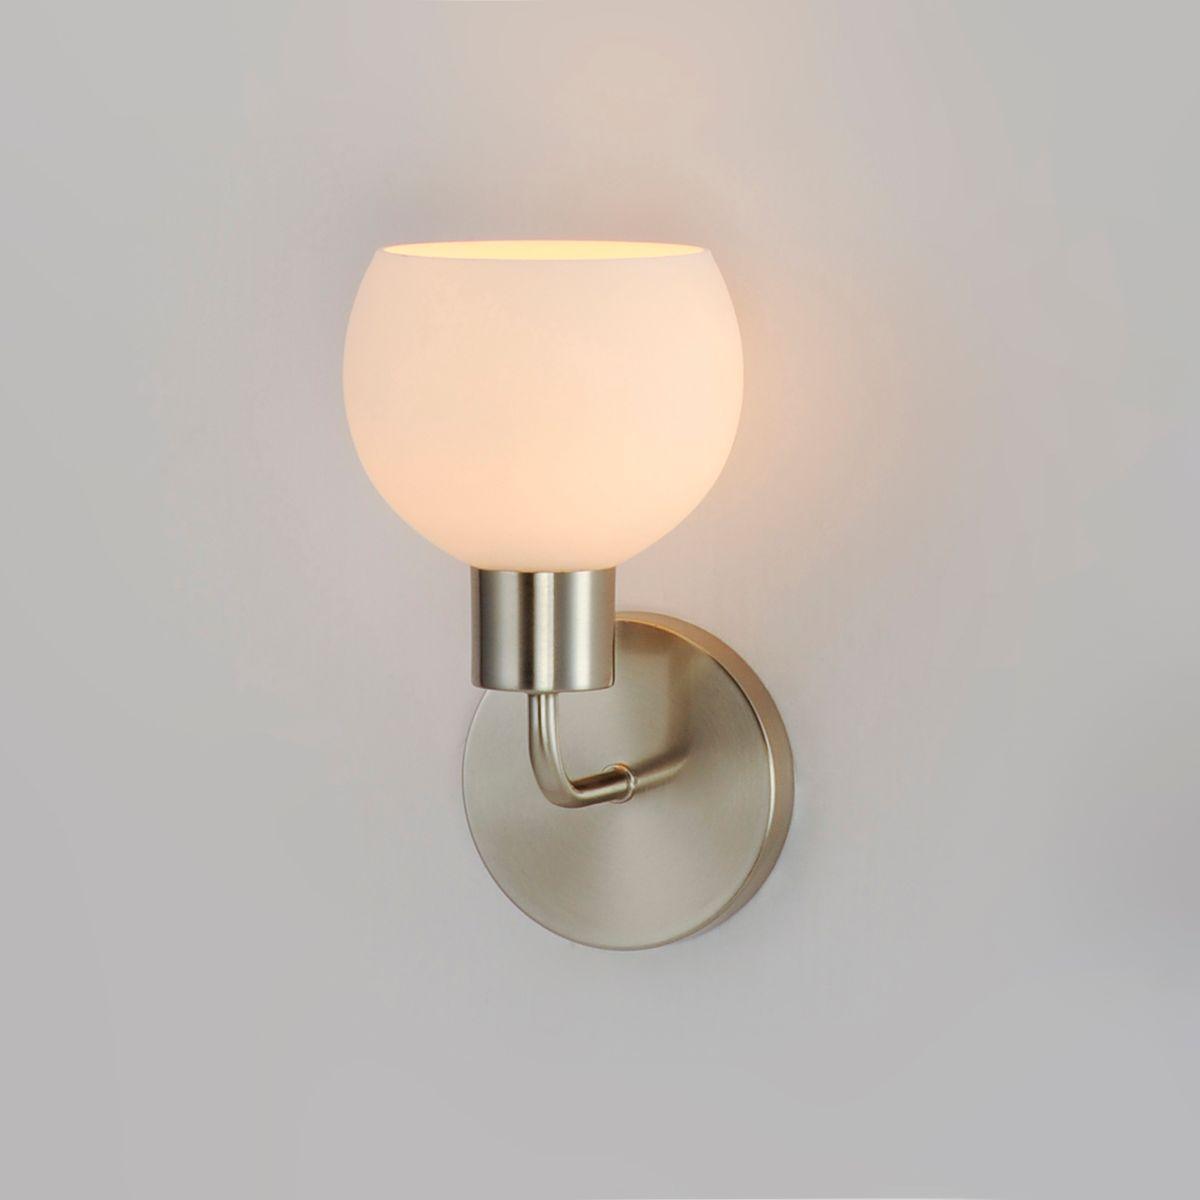 Coraline 11 in. Armed Sconce